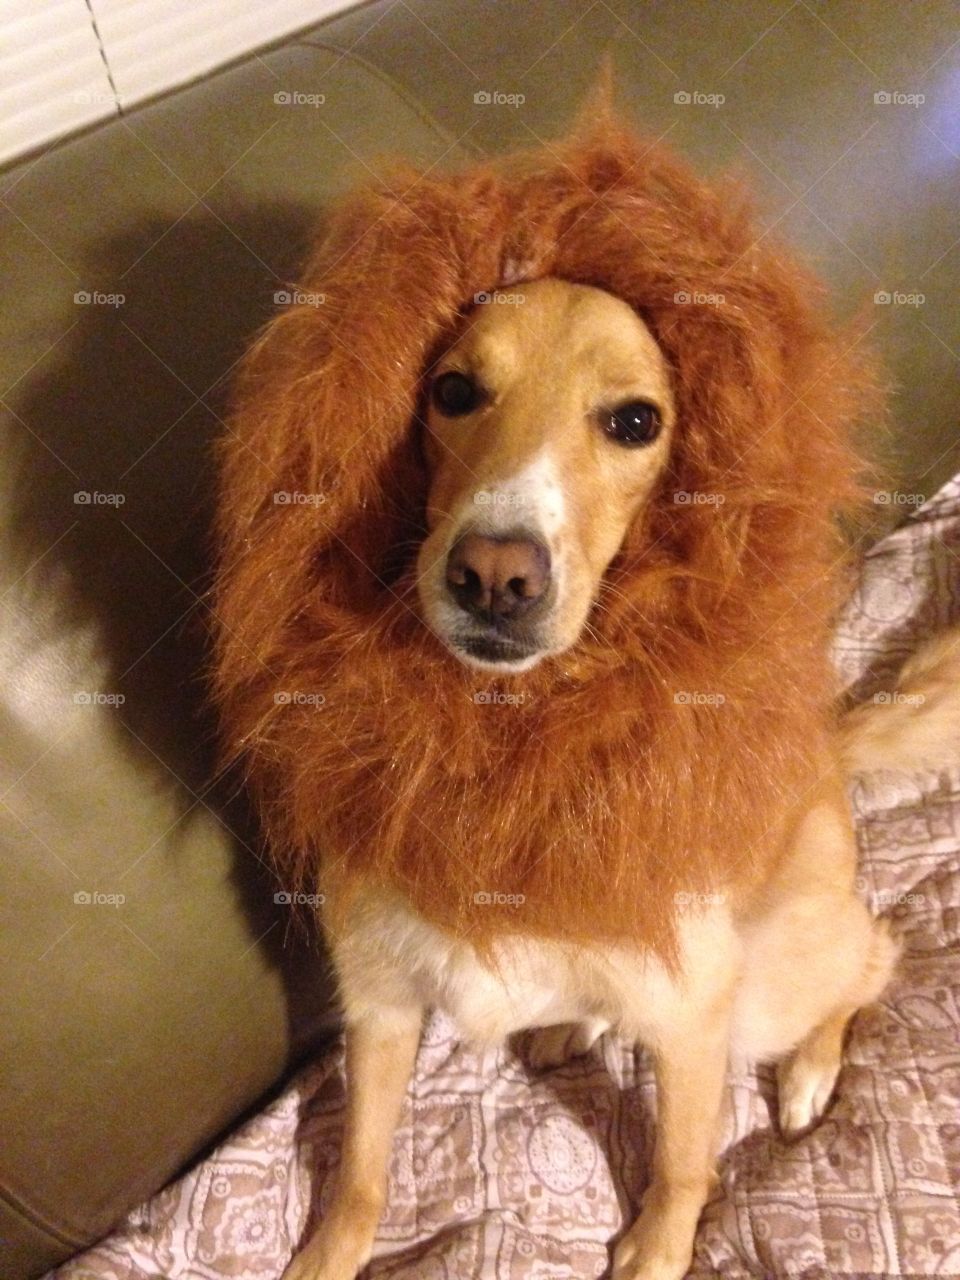 Hear me roar.  My dog in a lion mane costume.  Dressed up for Halloween.